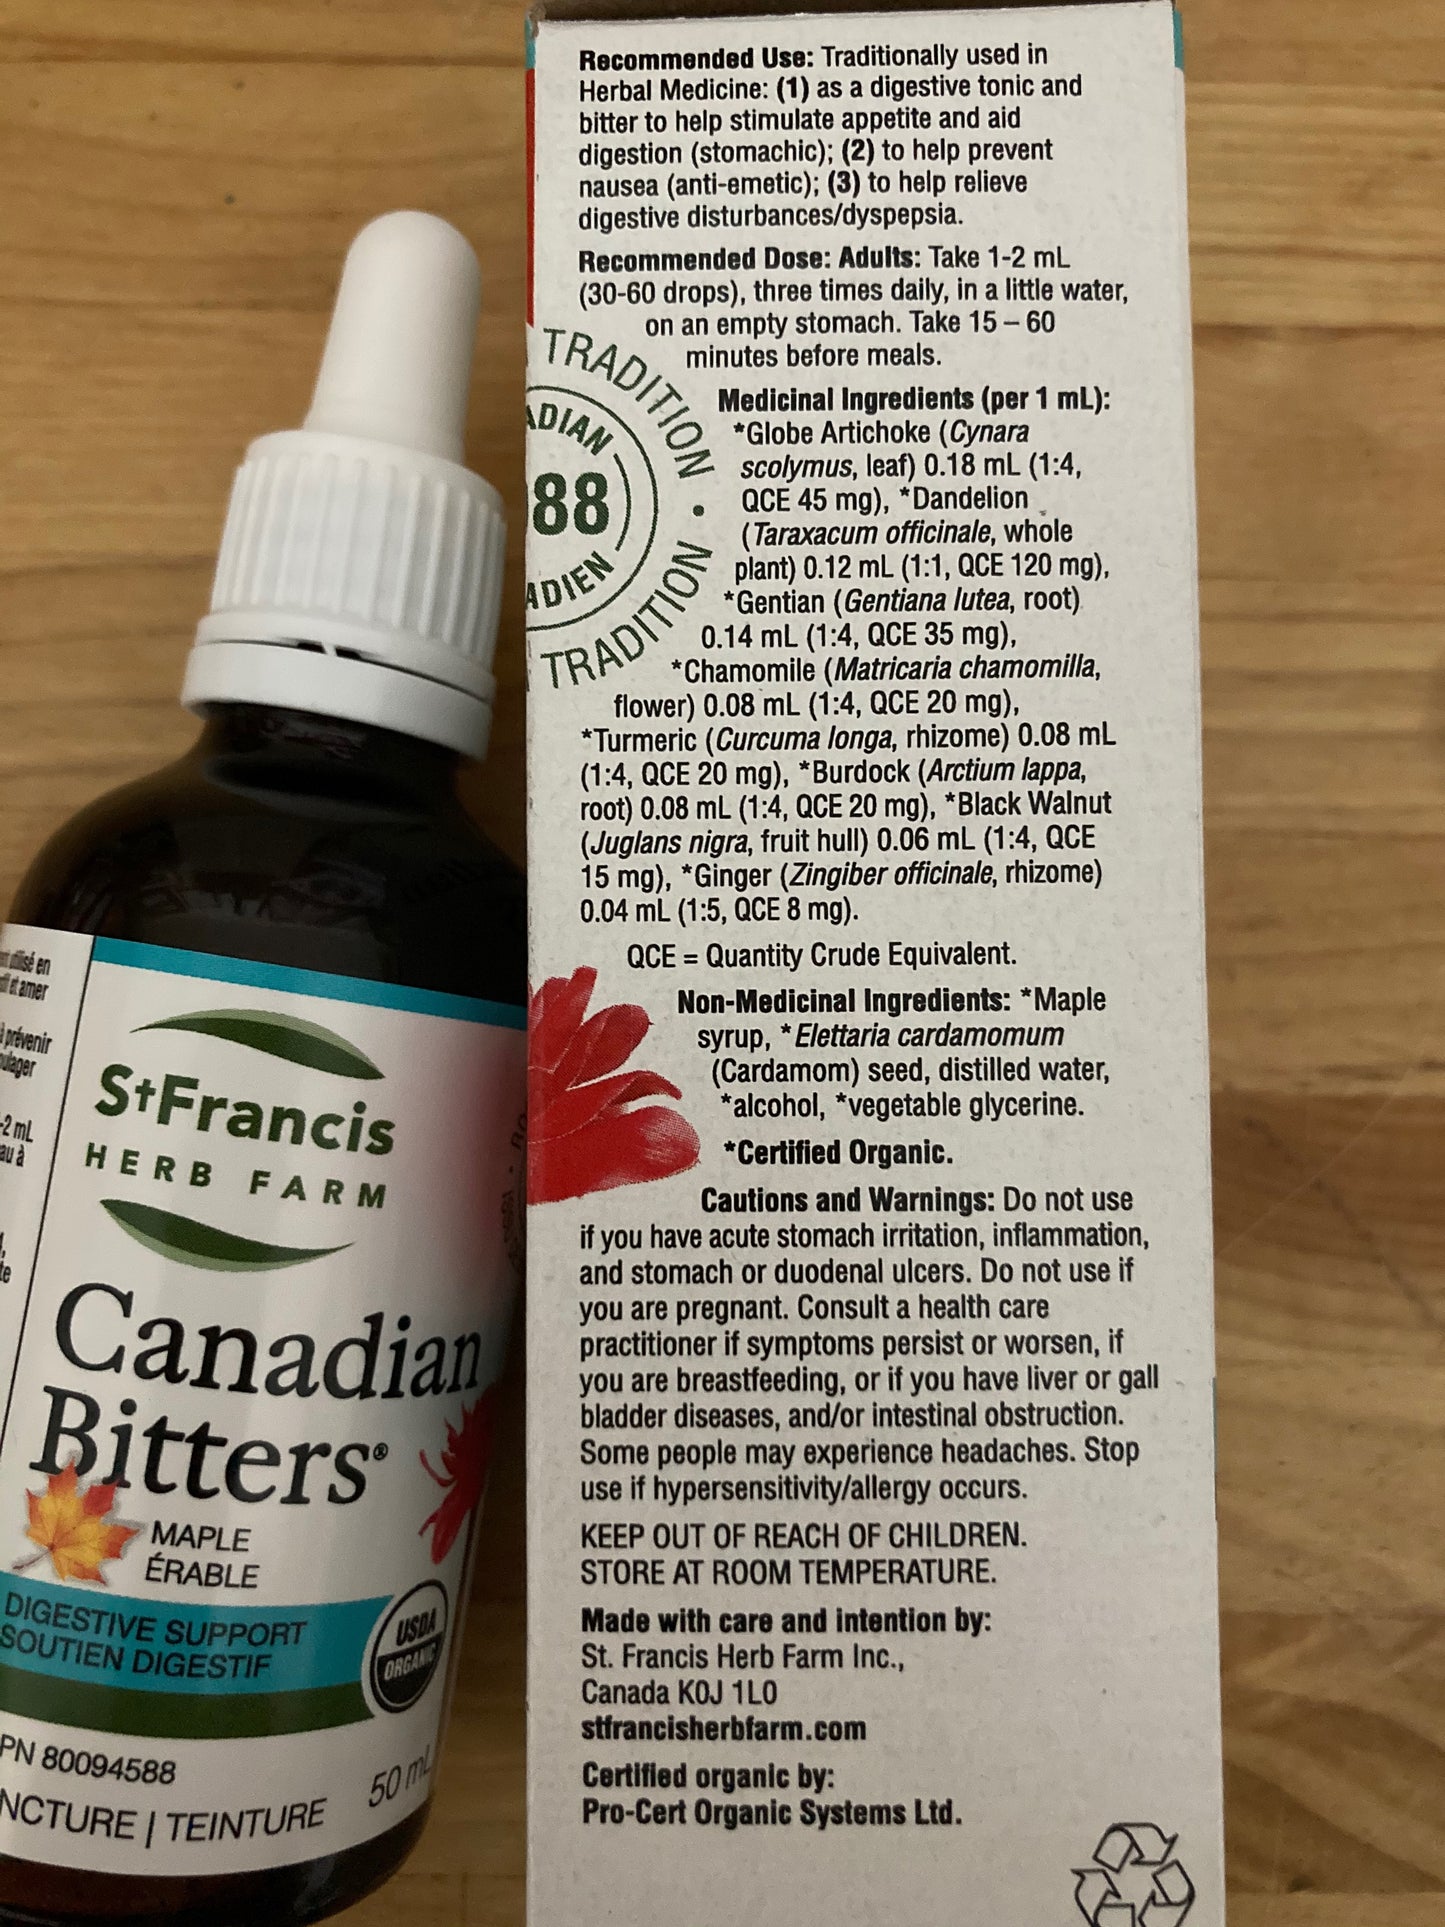 St Francis Holistic Health - CANADIAN DIGESTIVE BITTERS with&without MAPLE SYRUP